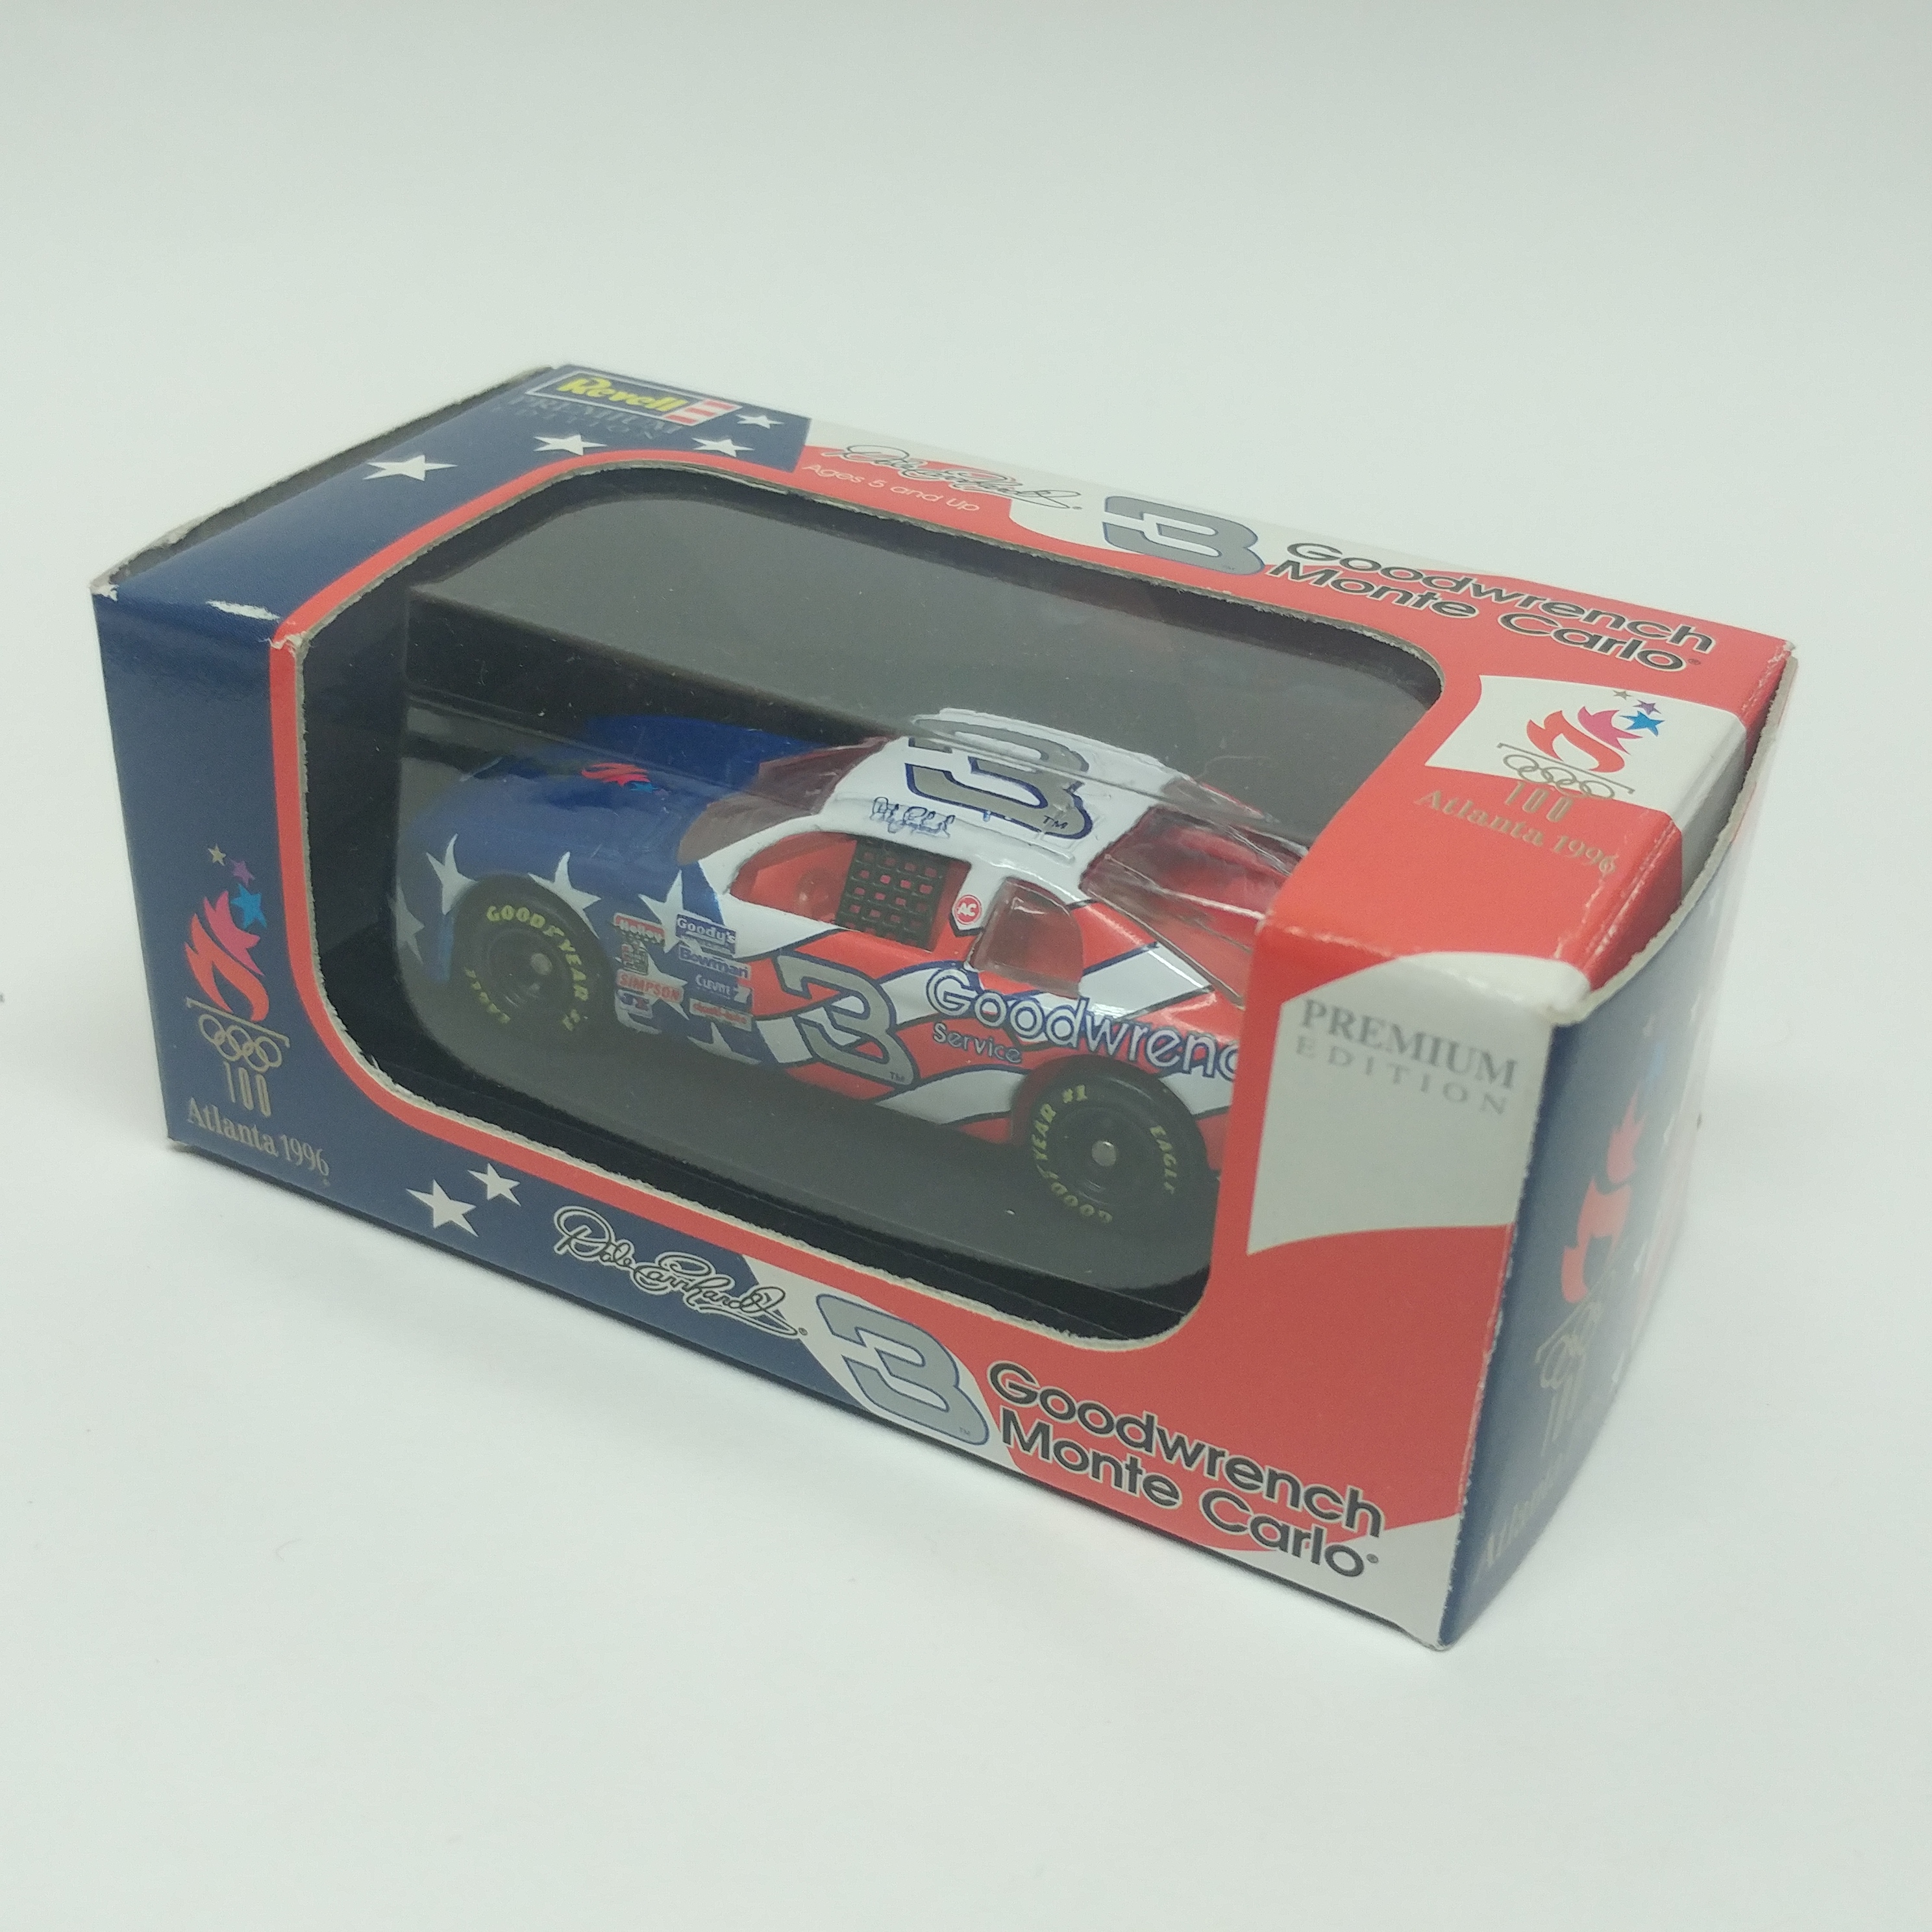 Details about   Dale Earnhardt #3 1996 Olympic GM Goodwrench Action 1:64 NASCAR Racing 